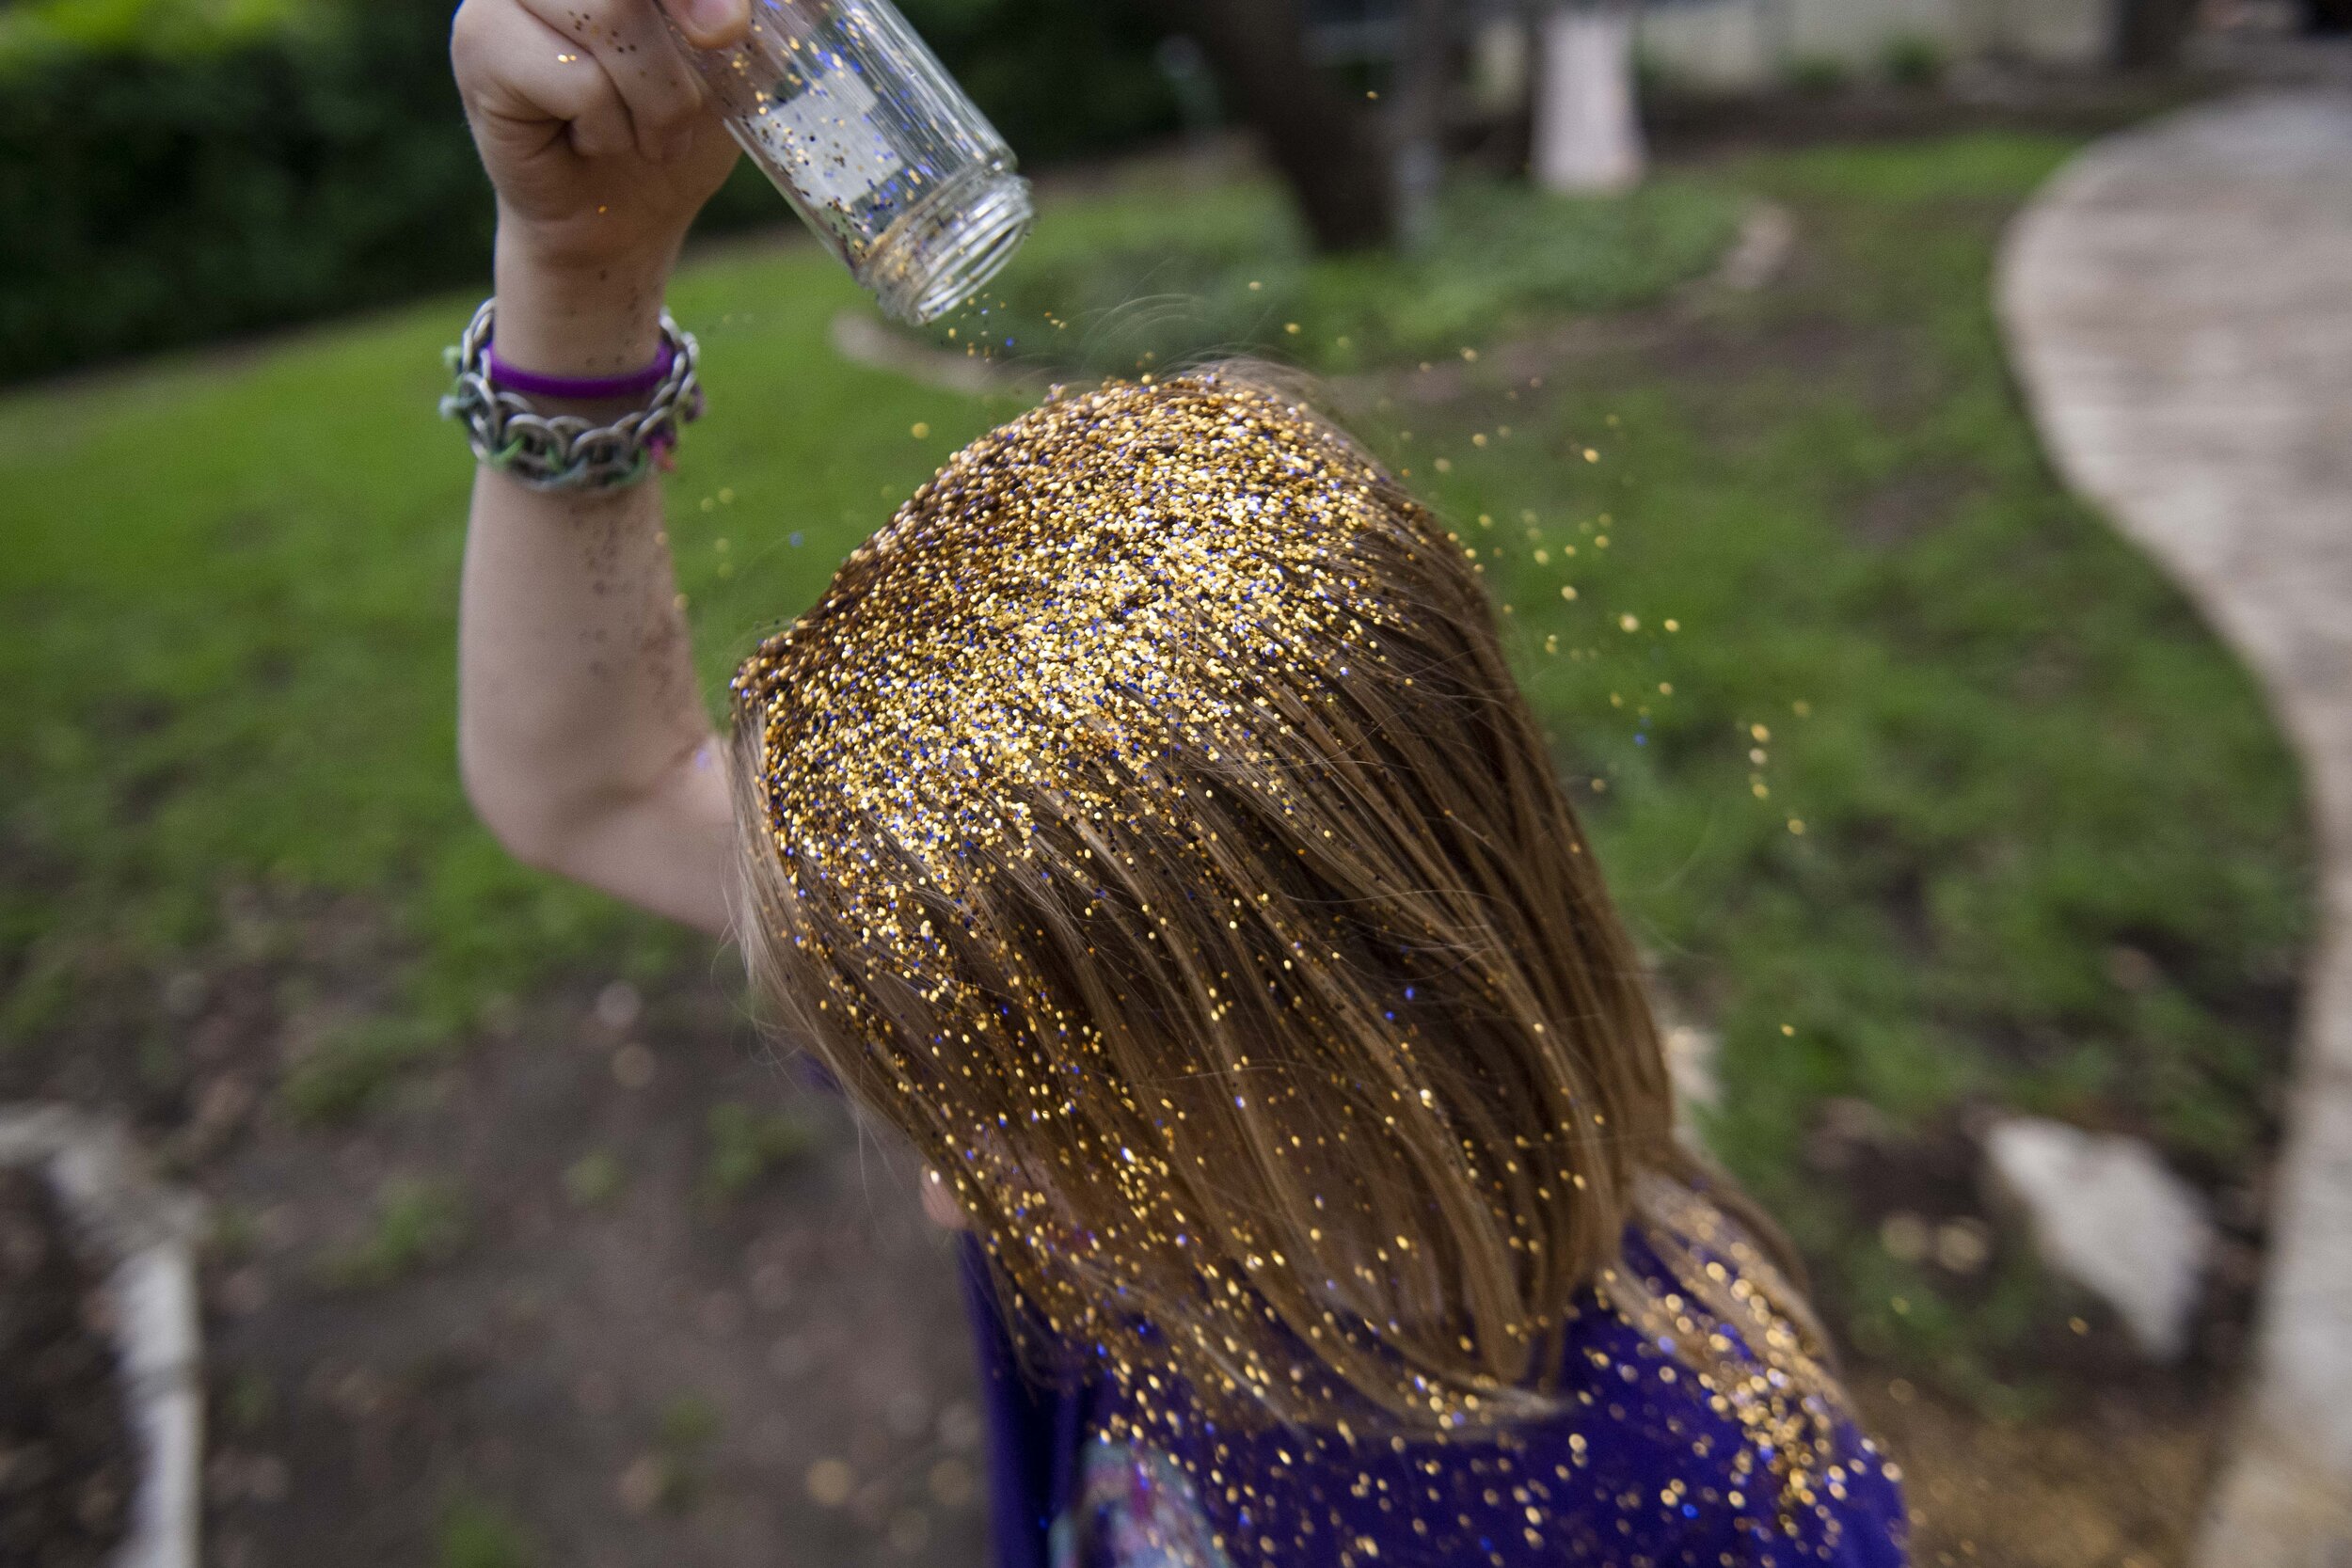  Keegan, a gender creative child, 9, pours glitter on his head during his 9th birthday party at his home in Austin, Texas, U.S., May 10, 2019.  The glitter party was inspired by a Queer Eye episode.  Keegan's family says he was motivated to try drag 